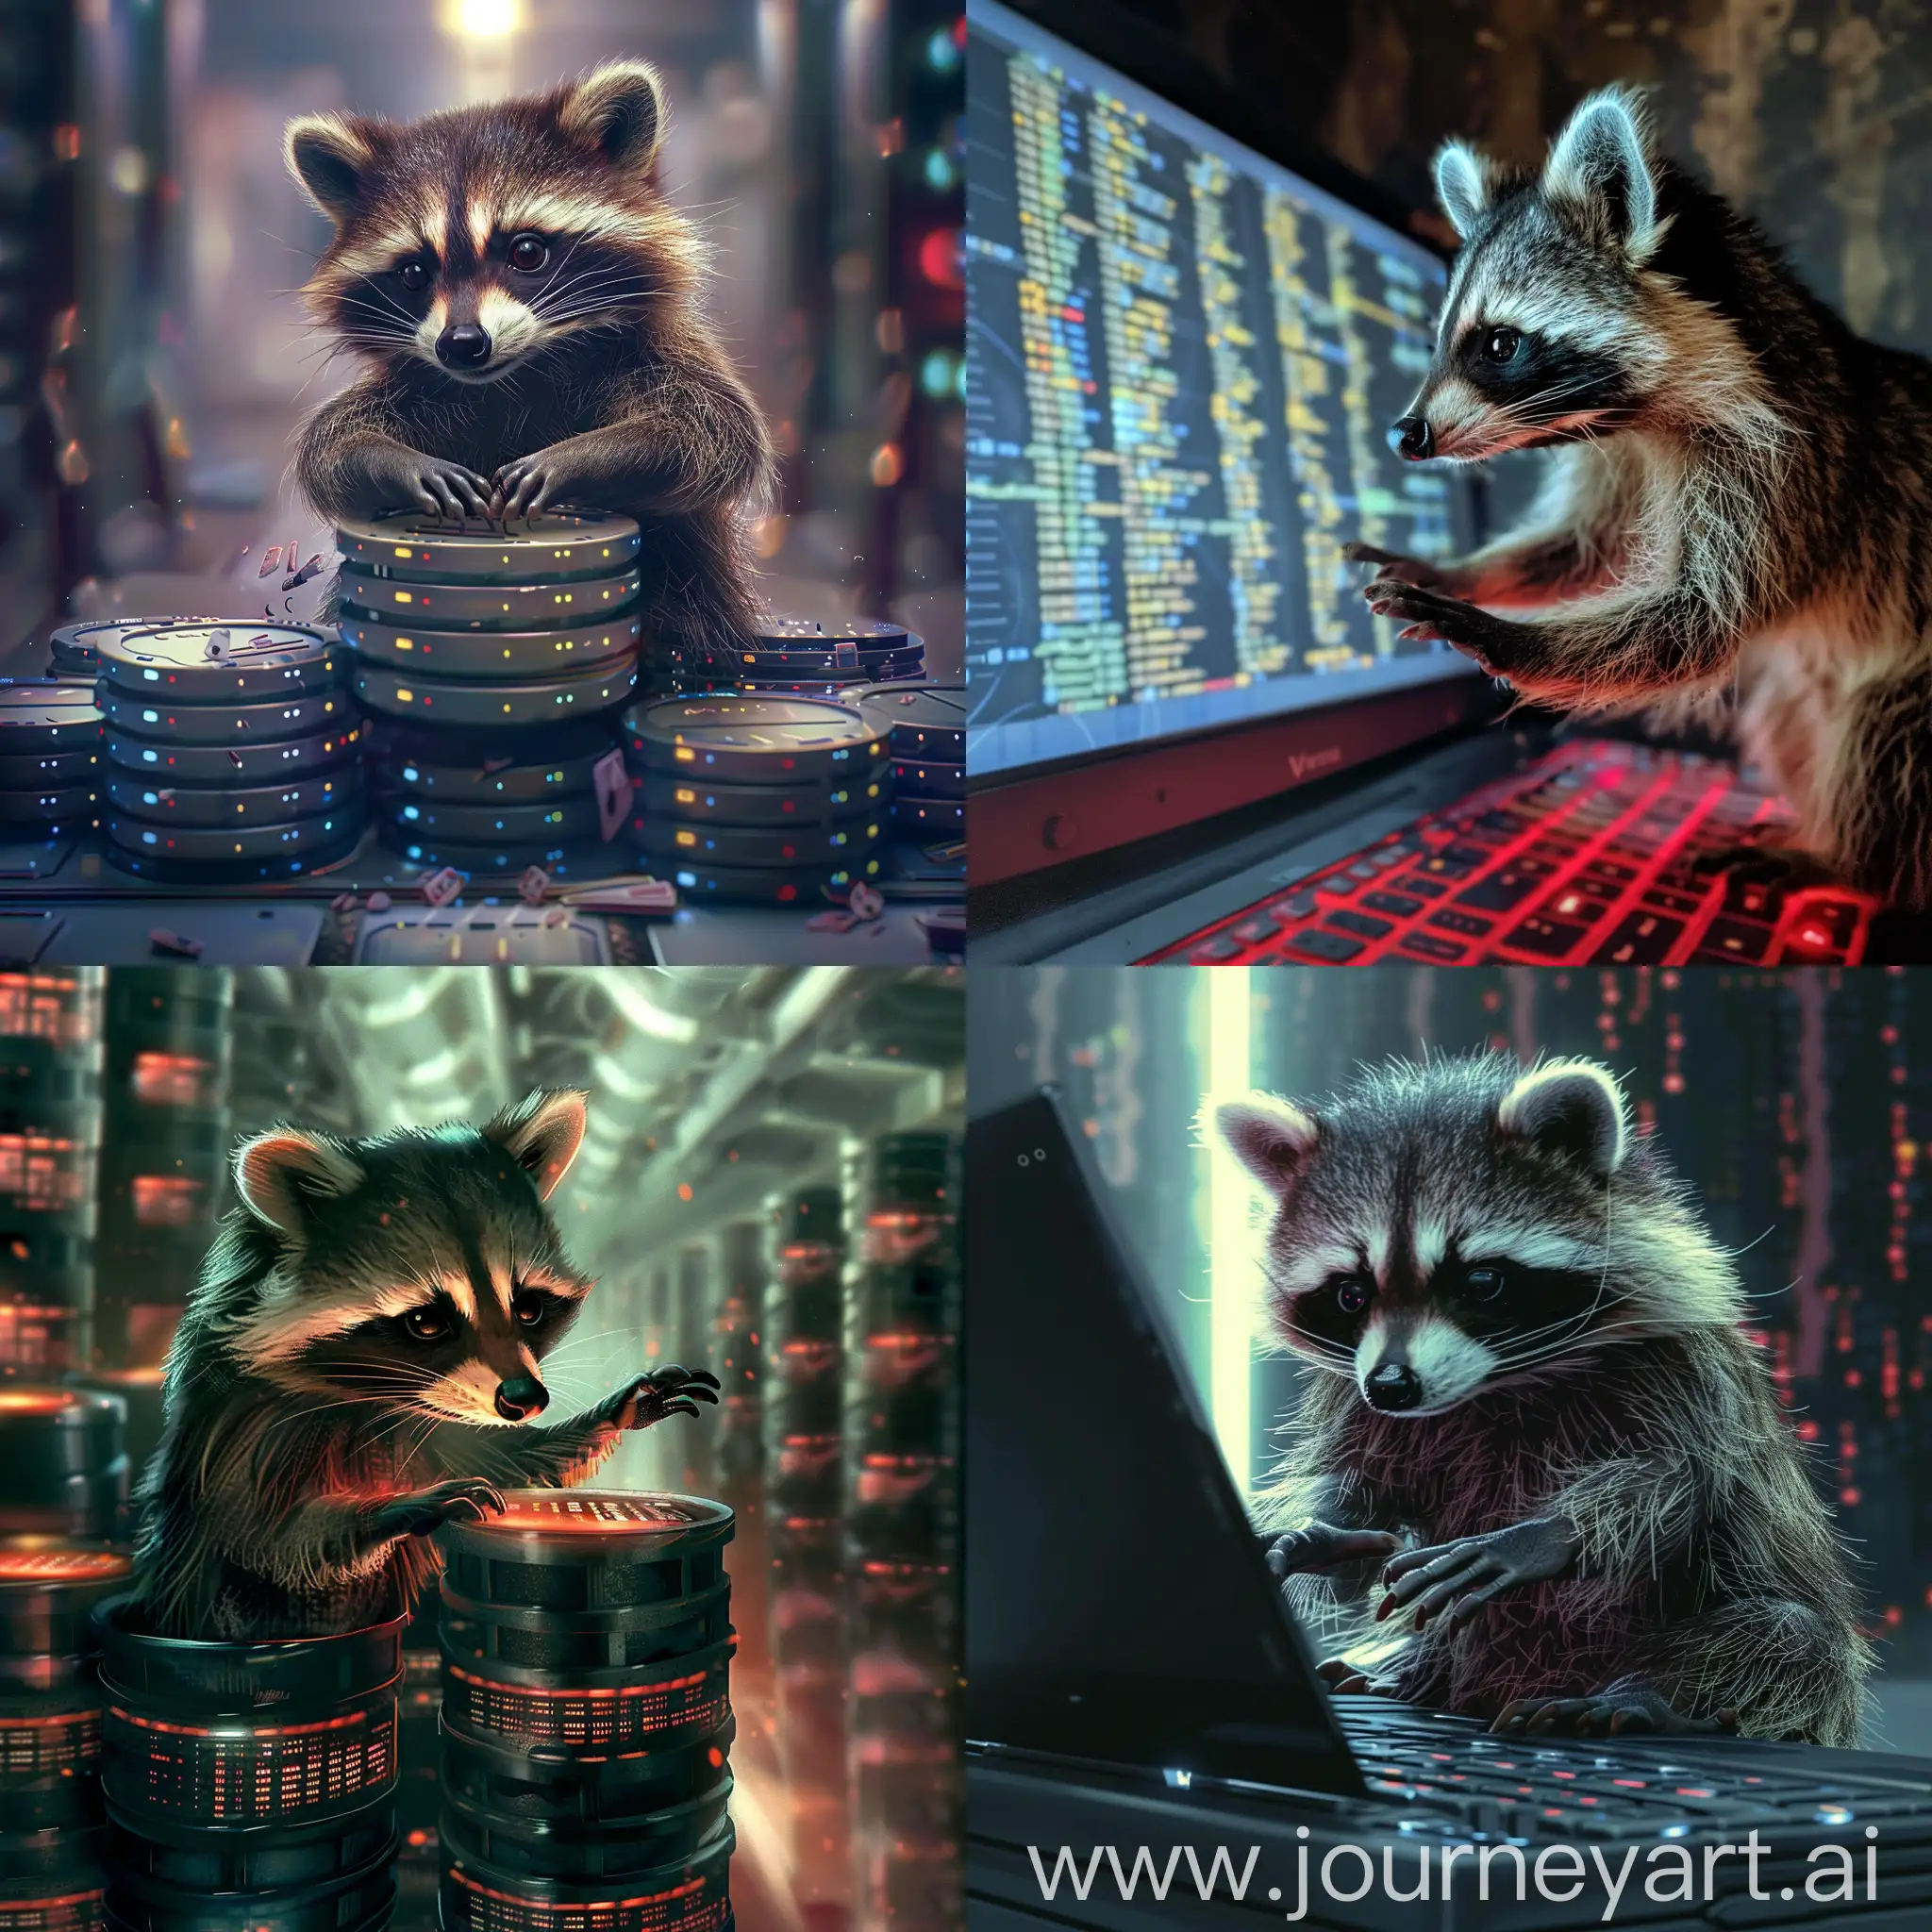 Playful-Digital-Raccoon-Interacts-with-Databases